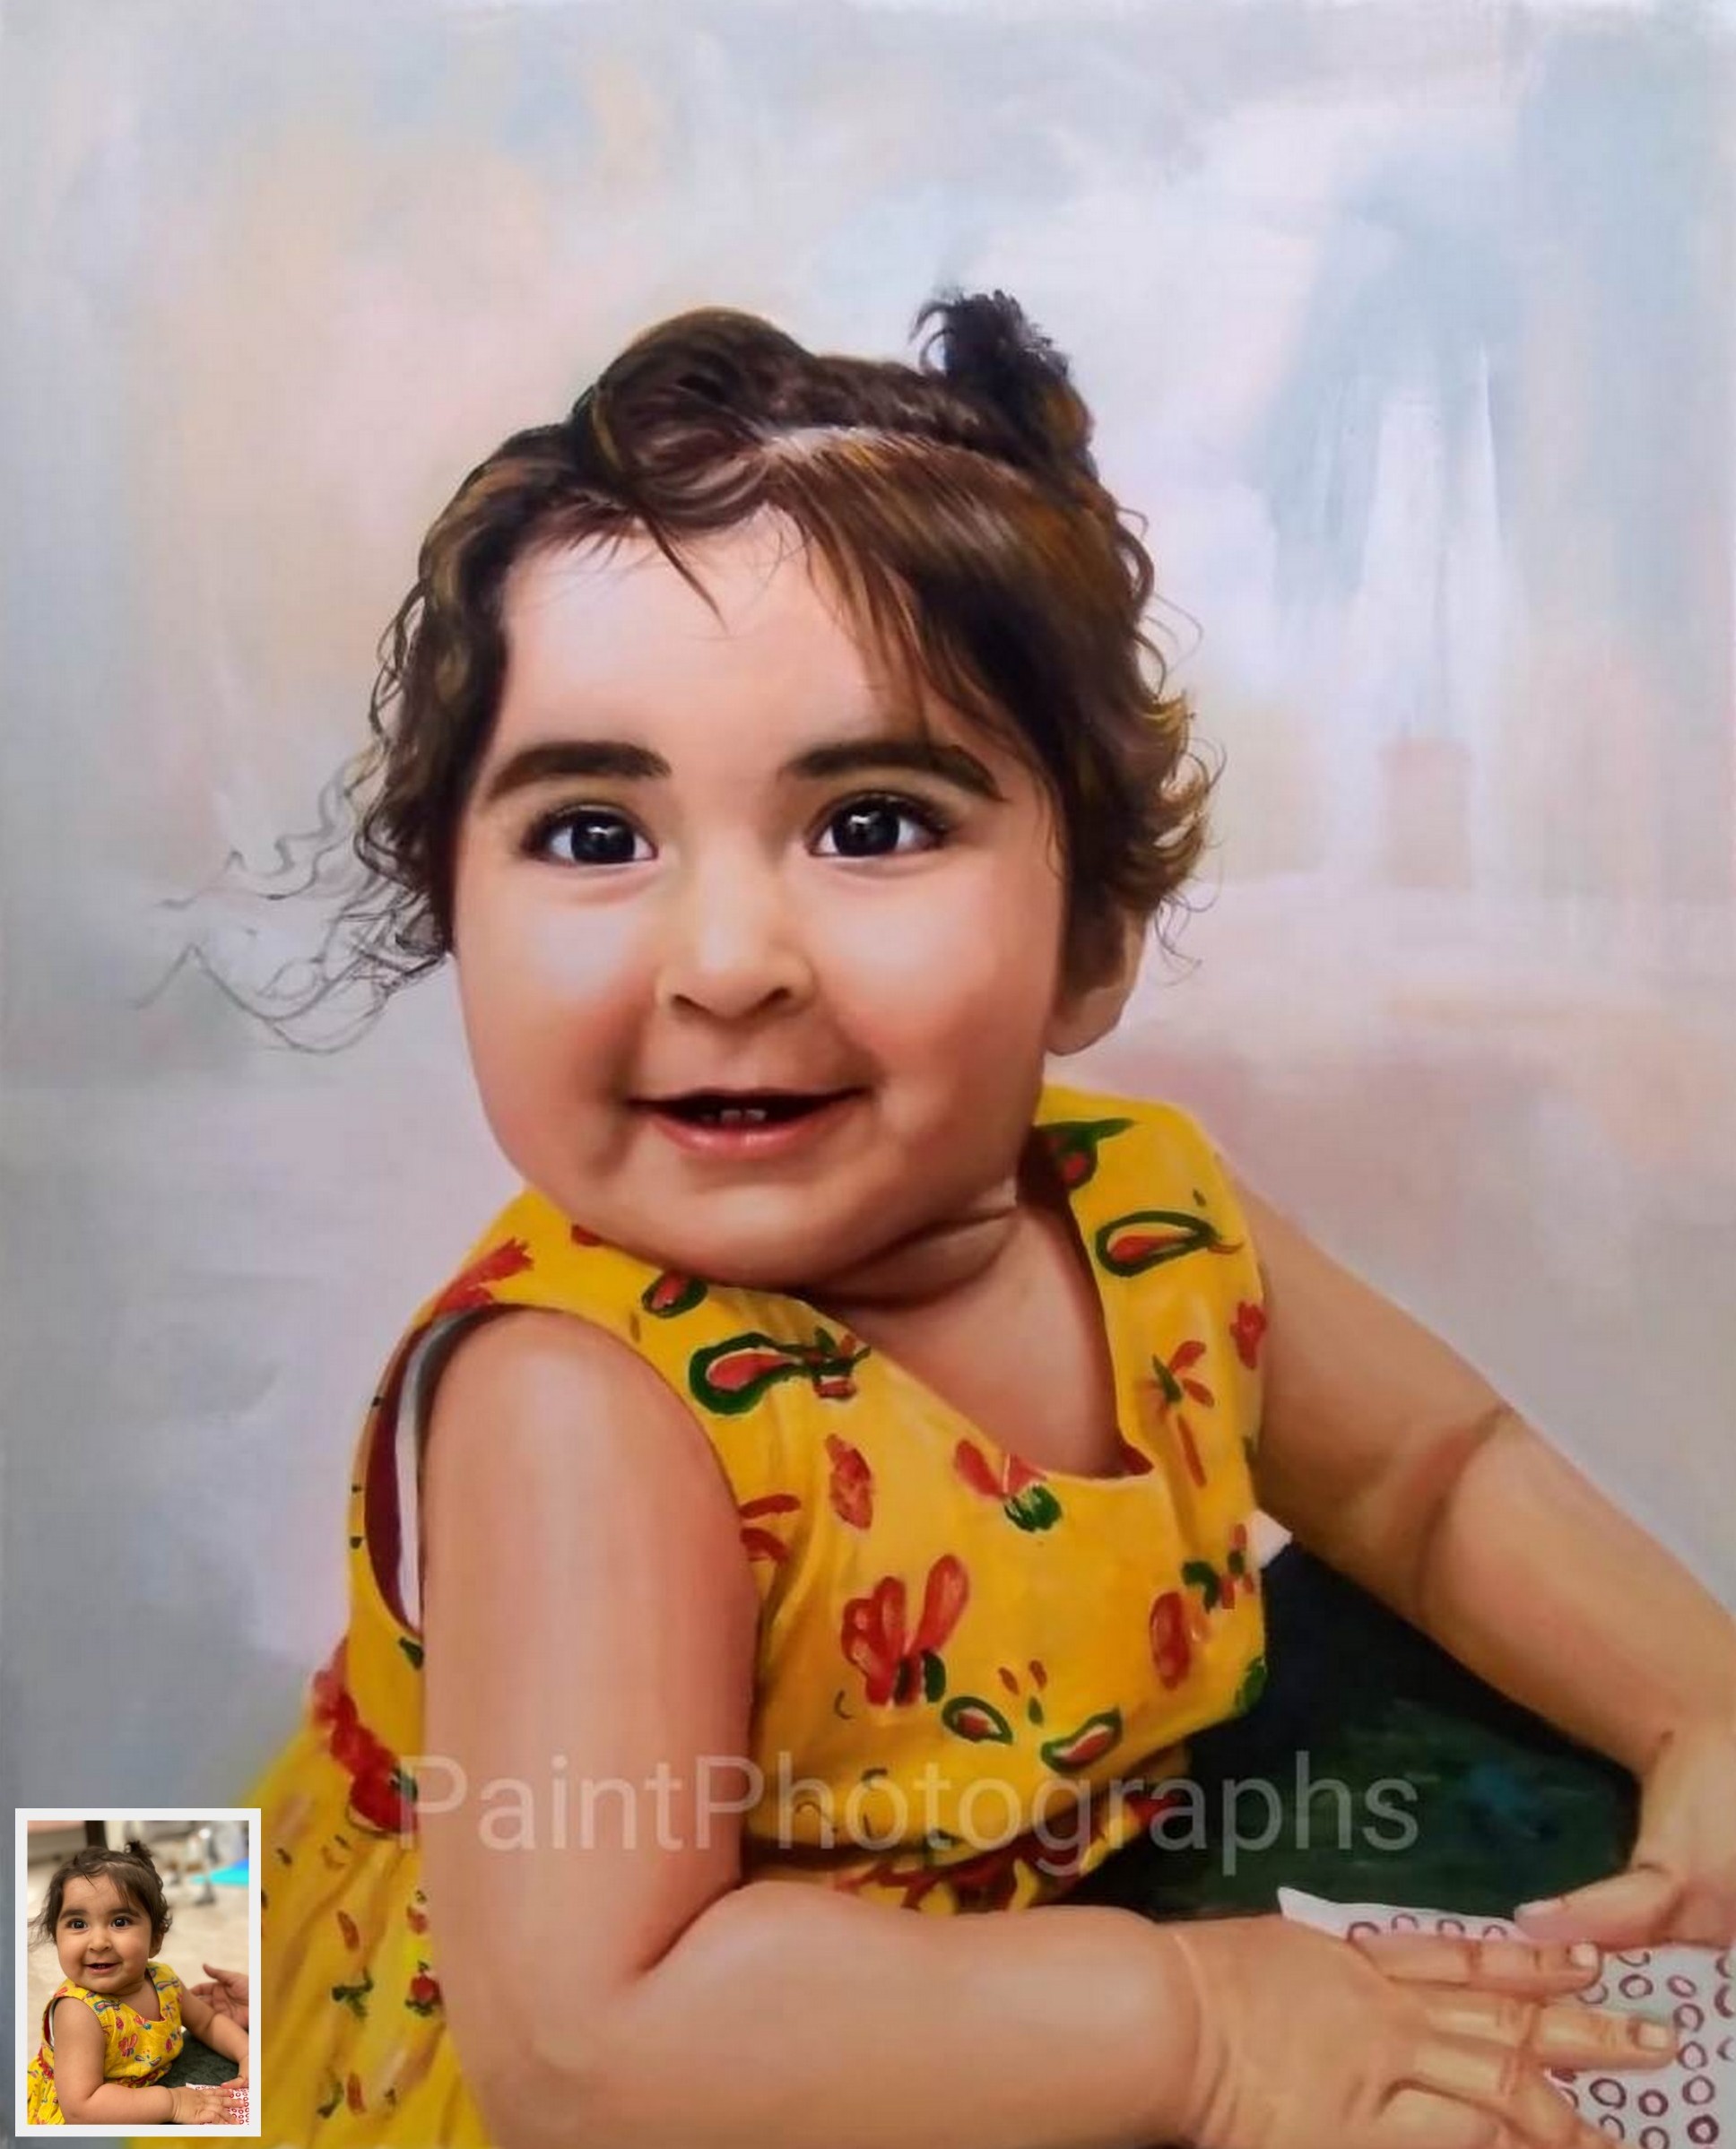 cute baby girl child portrait painting, photo into painting, painting from photo, photo painting